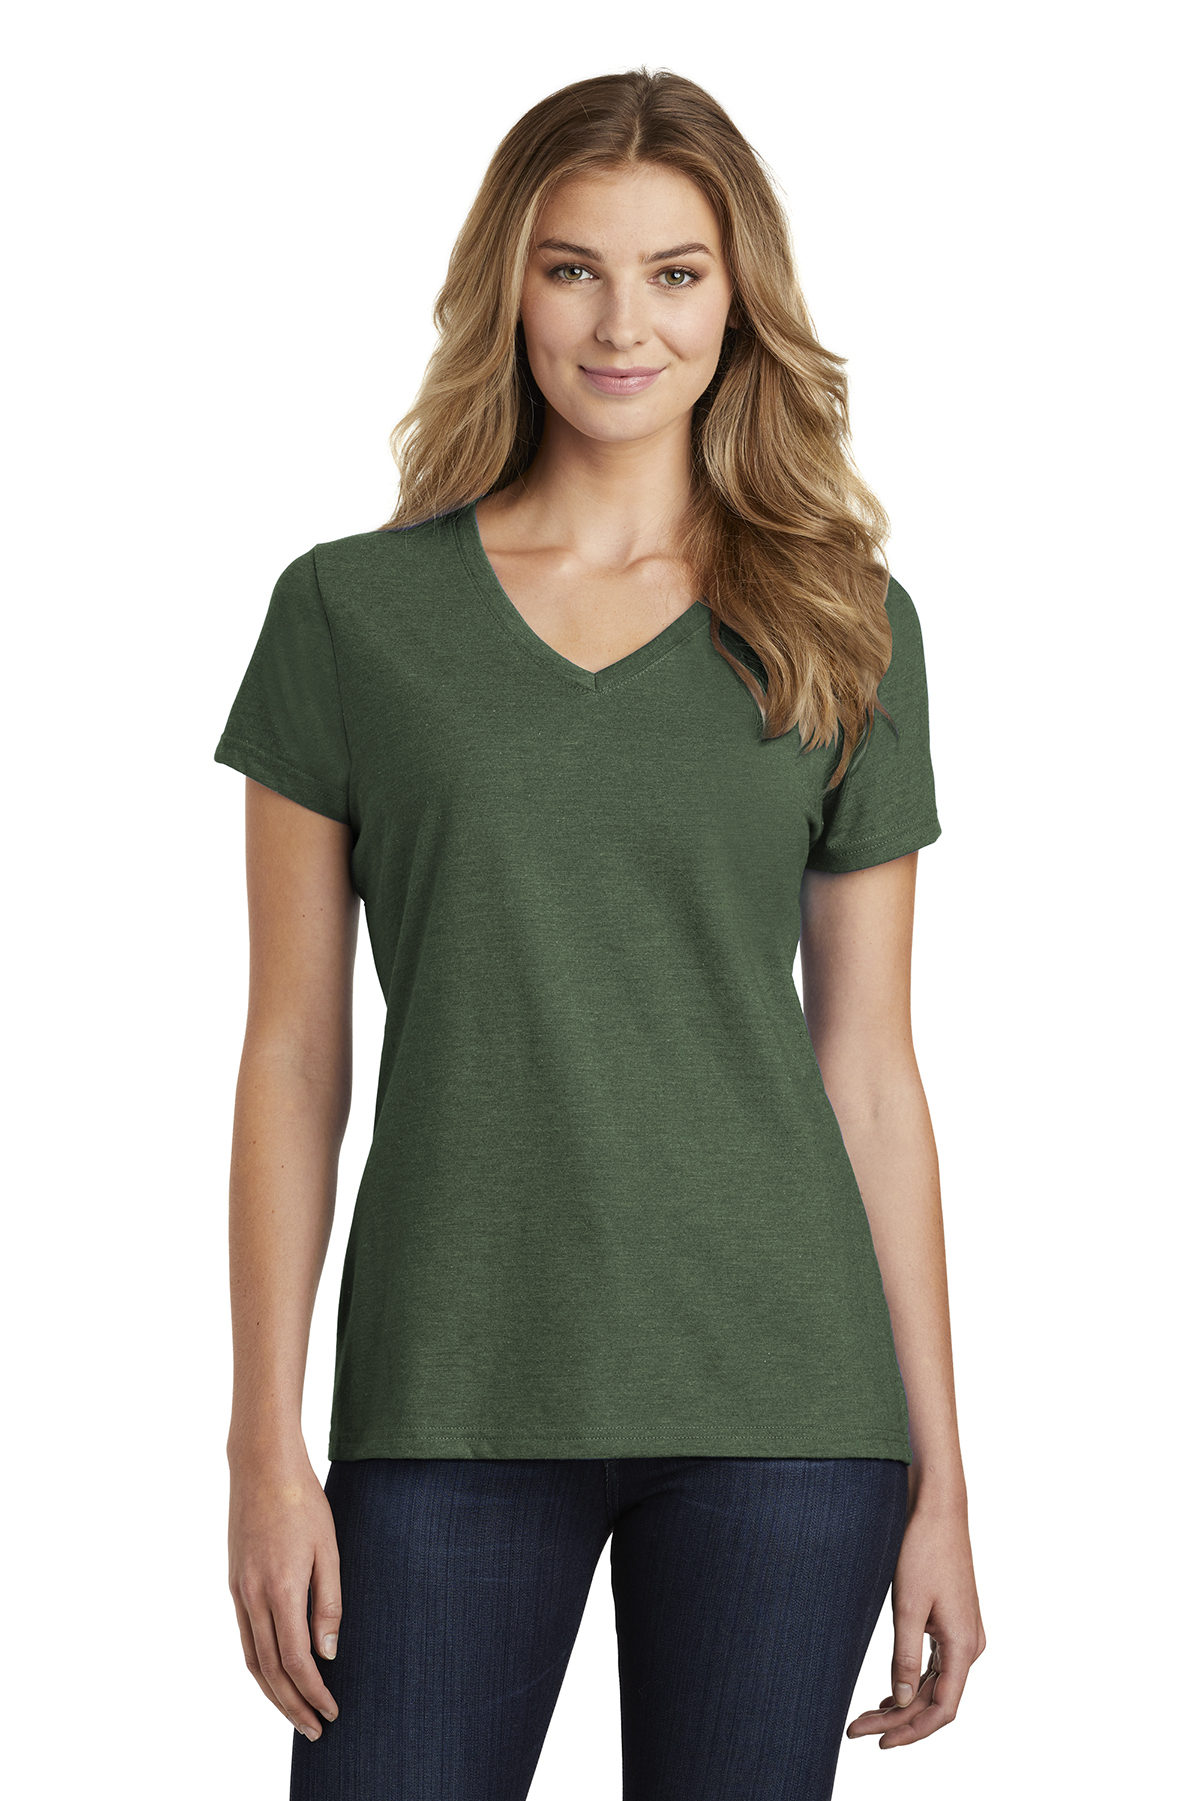 click to view Forest Green Heather